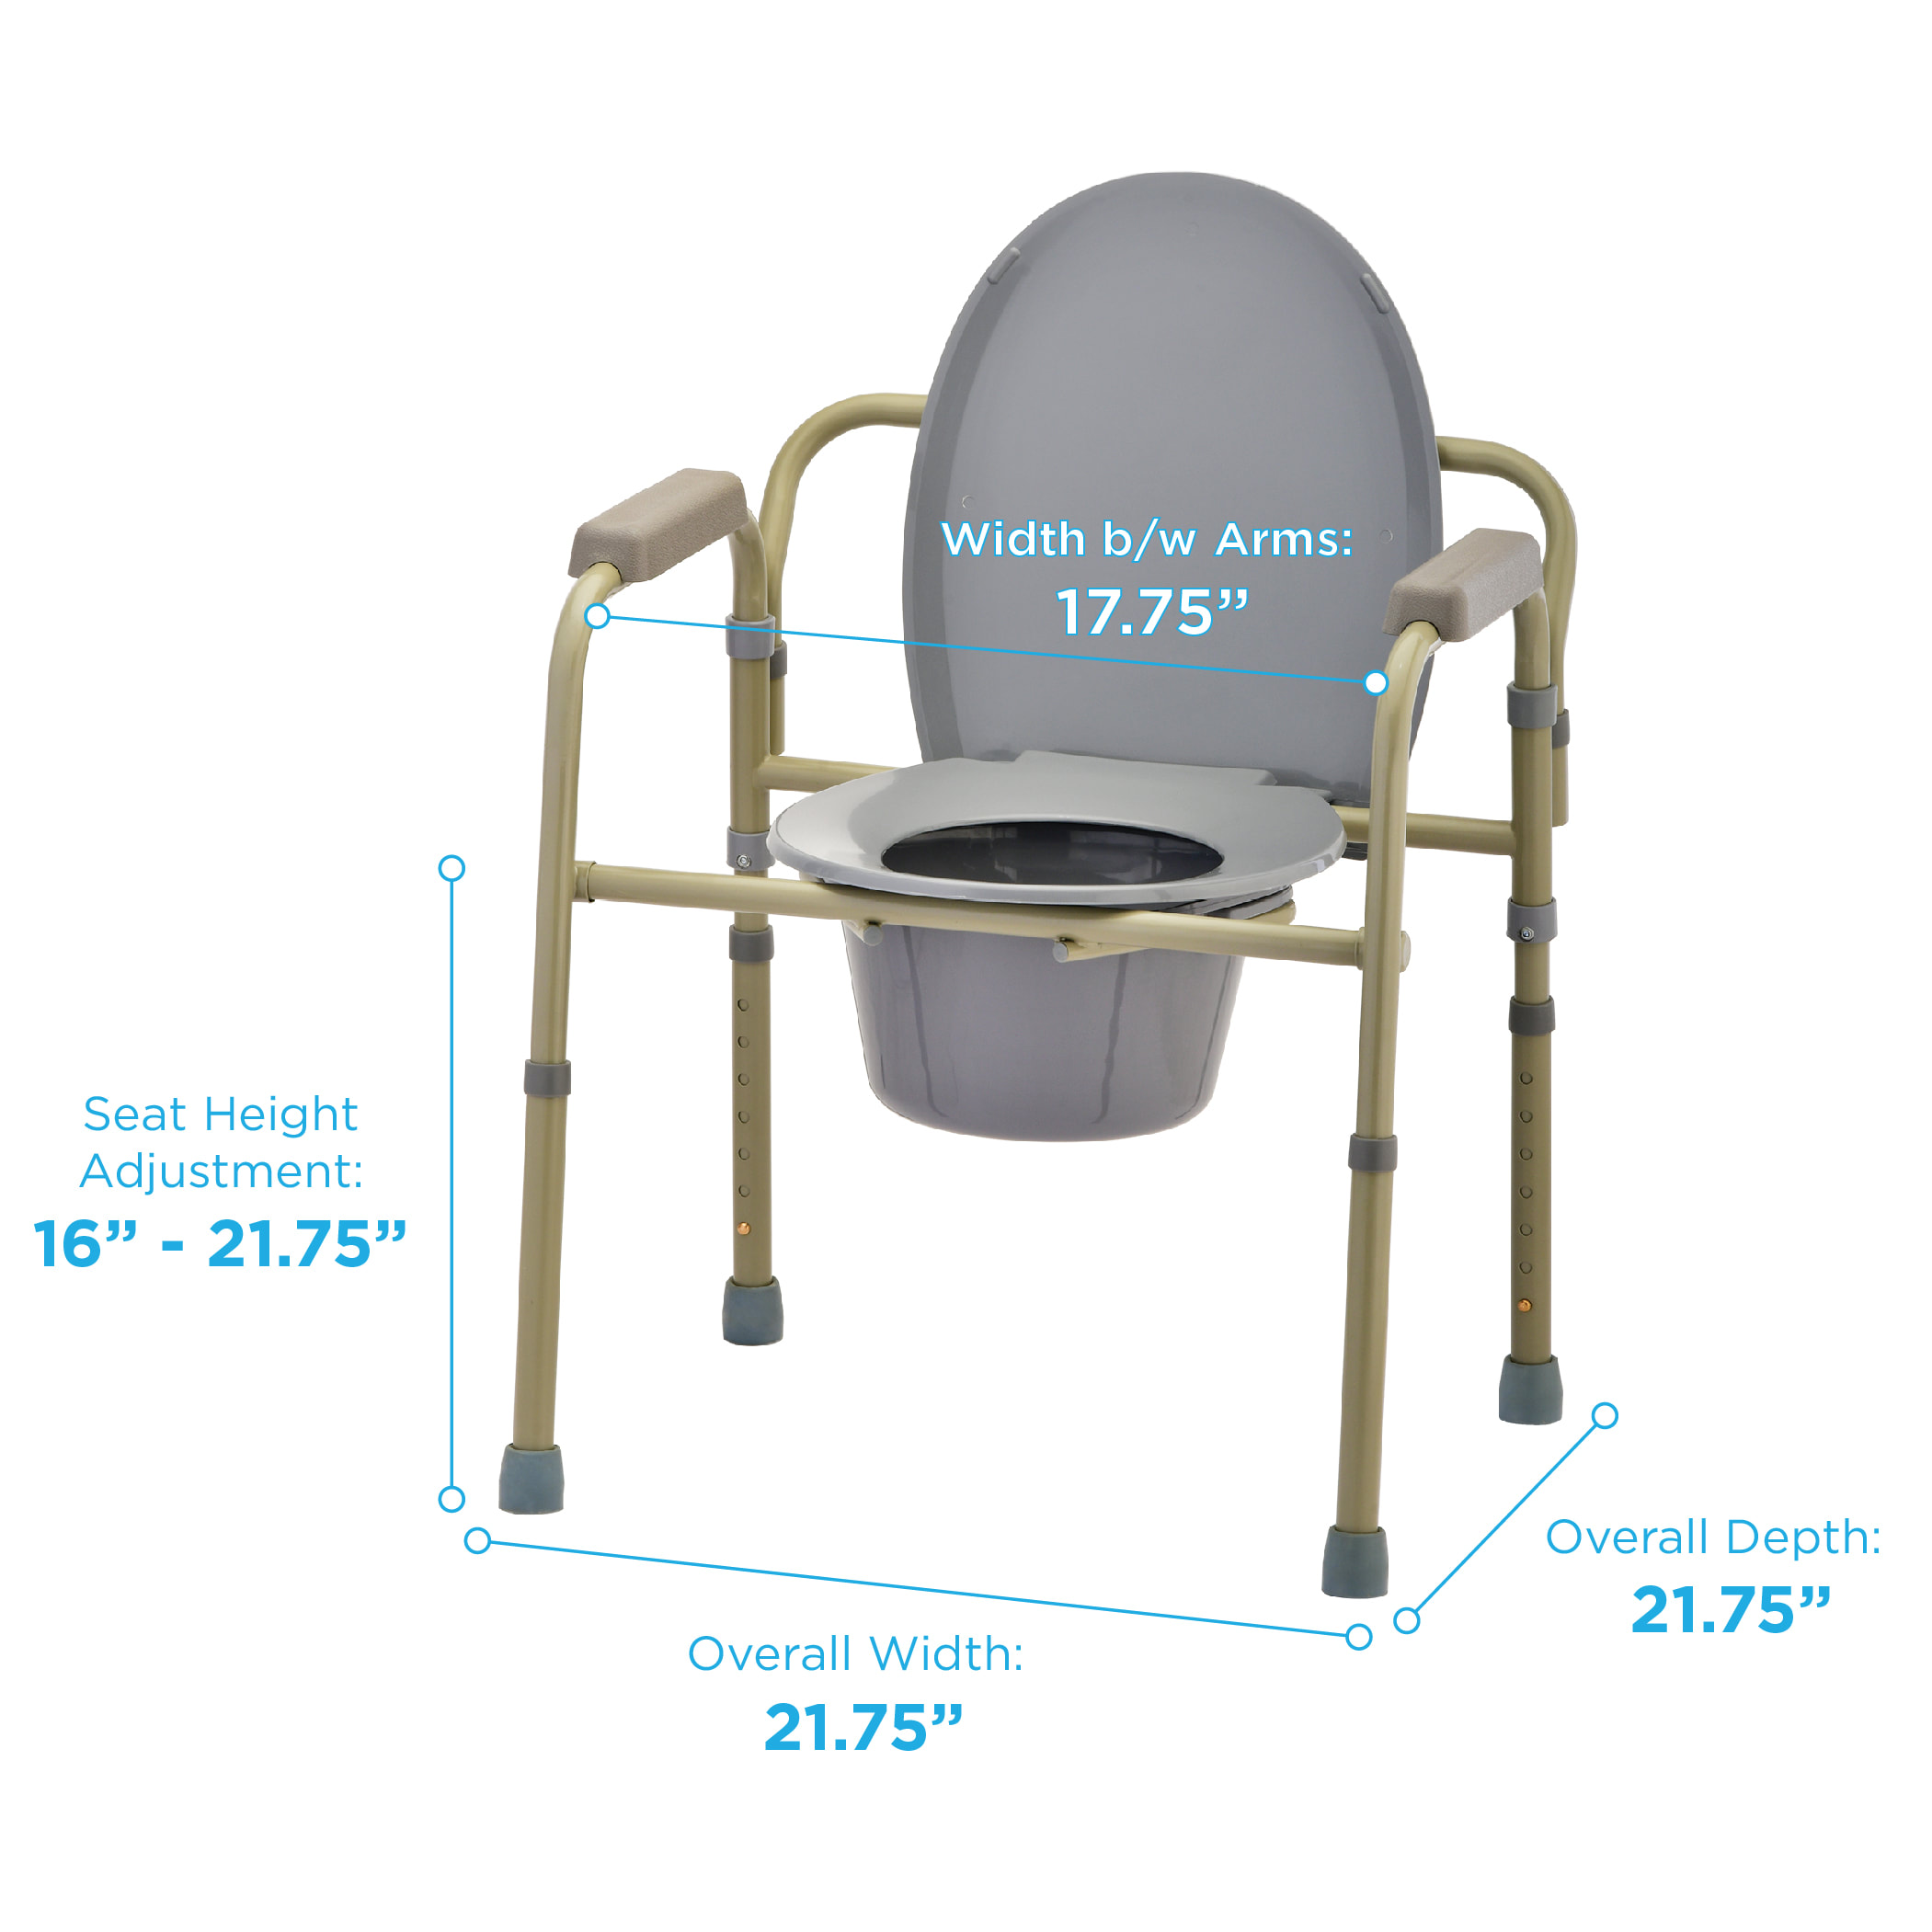 MB-THISTAR Safety Adult Bedside Commode Chair Potty Toilet Seat Folding Bathroom Medical 